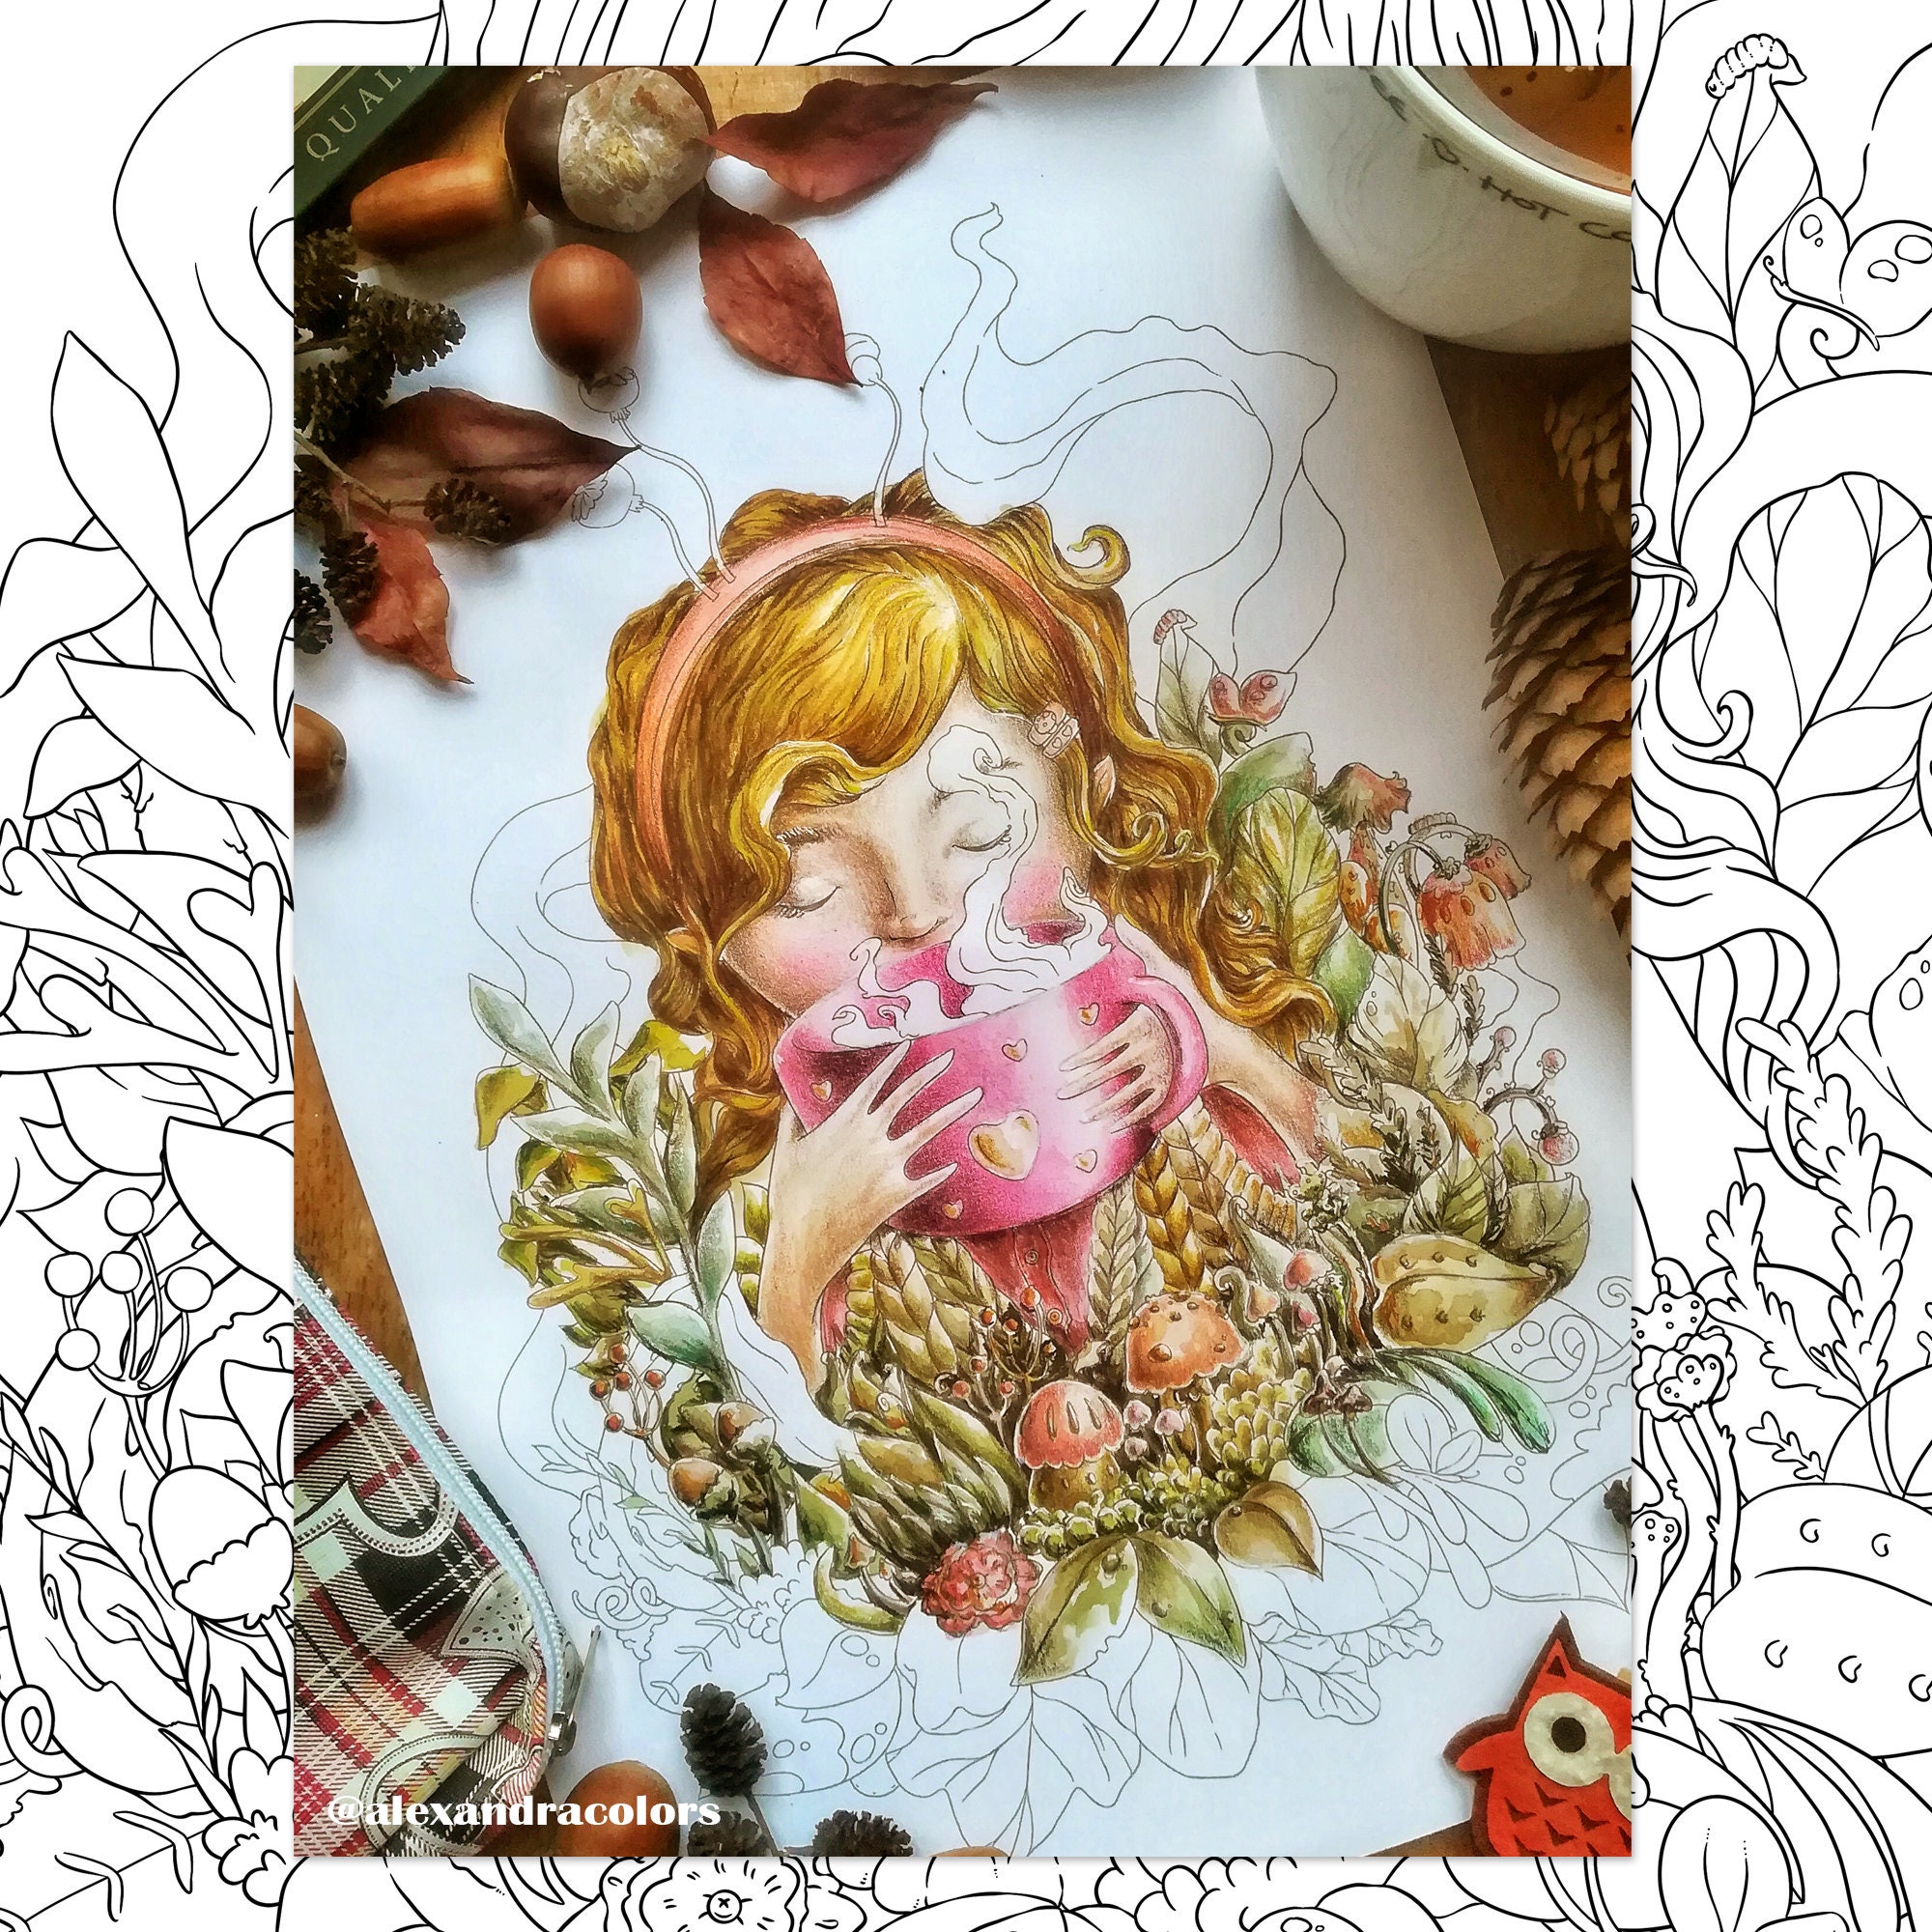 Cute Autumn A Coloring Book for Adults and Kids Featuring Easy and Re